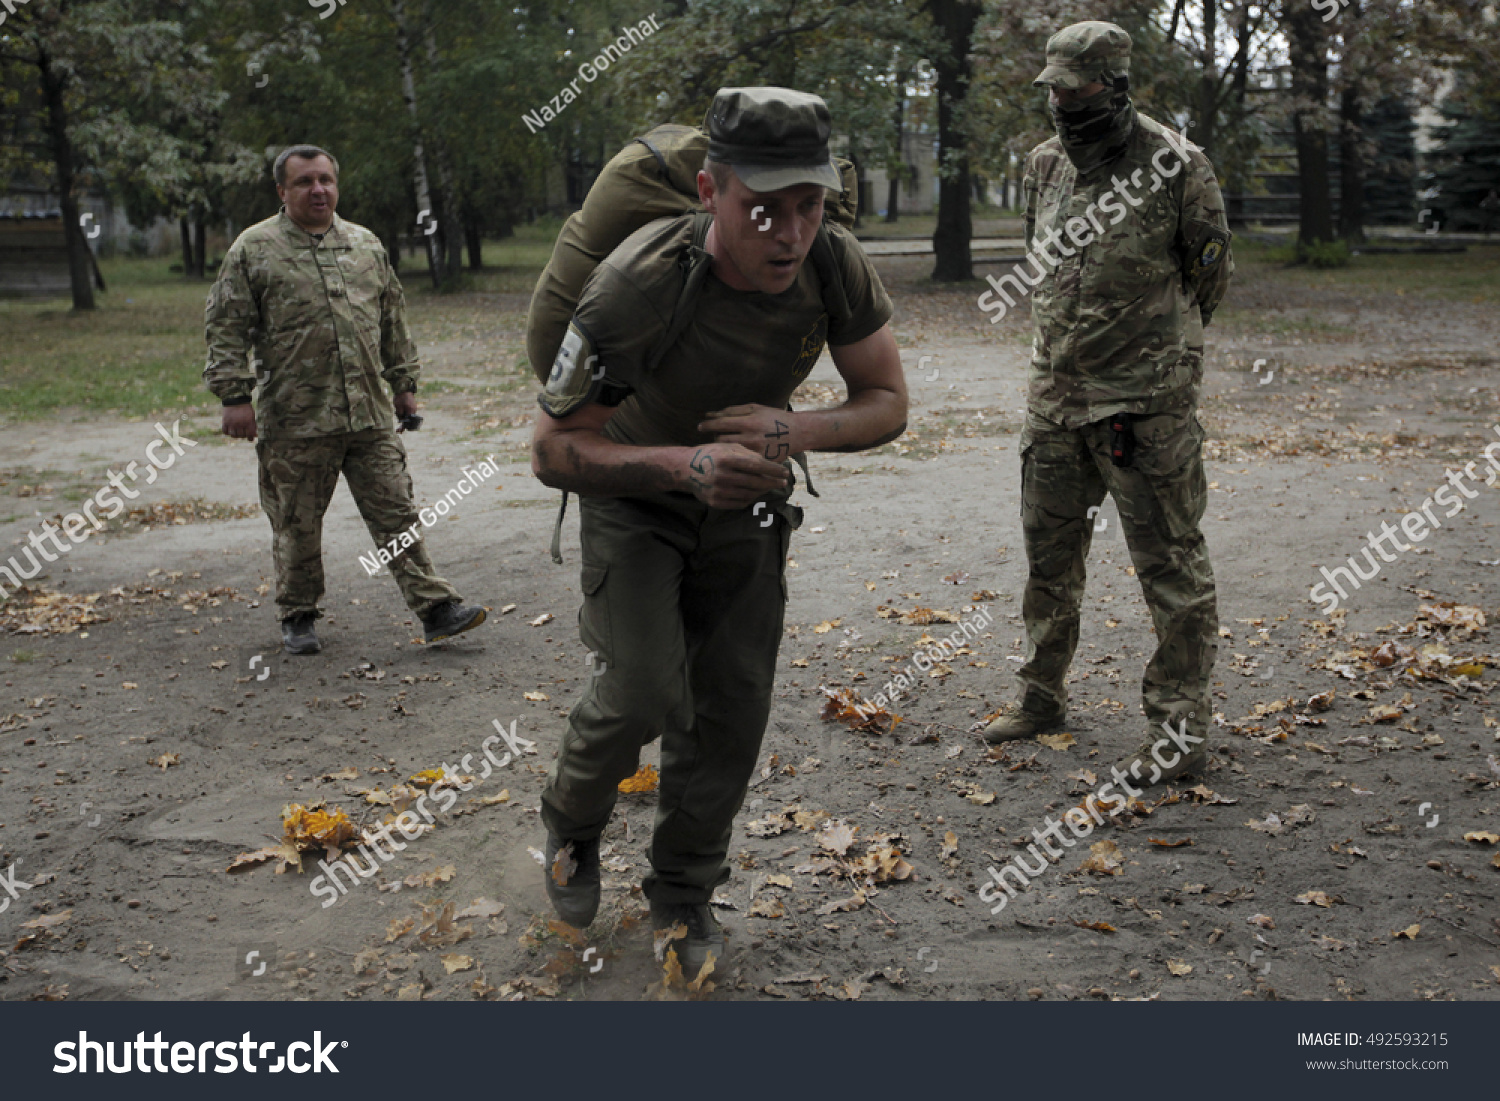 684 Army basic training Images, Stock Photos & Vectors | Shutterstock